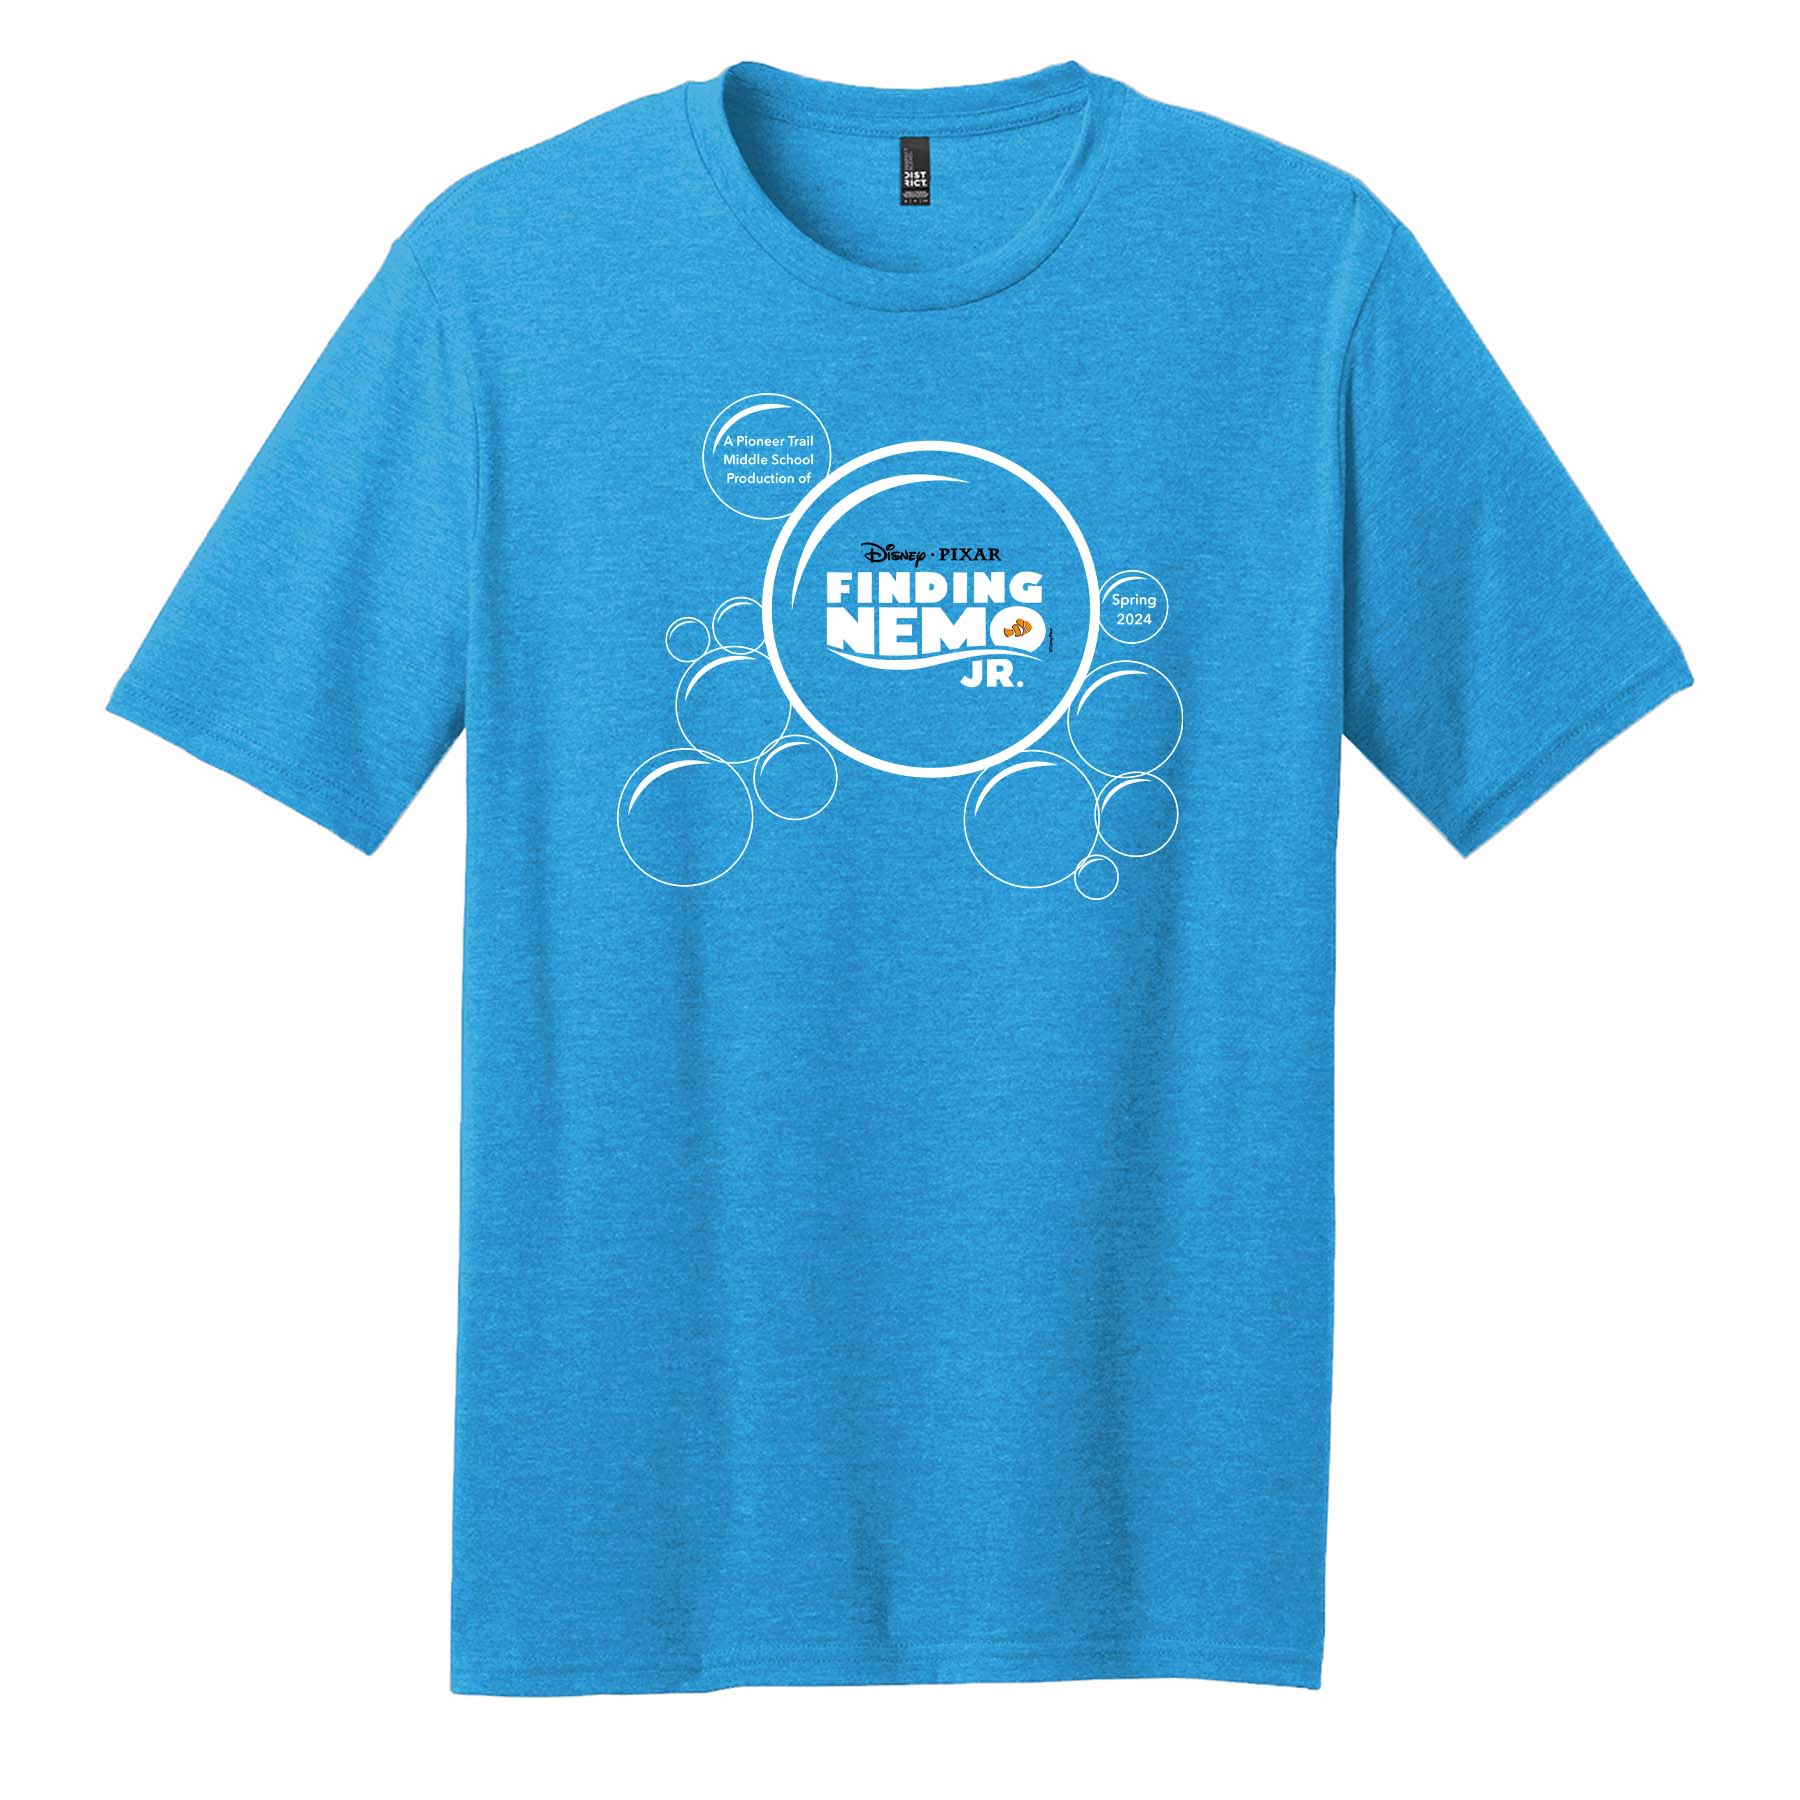 Finding Nemo Jr -- District Perfect Blend Tee